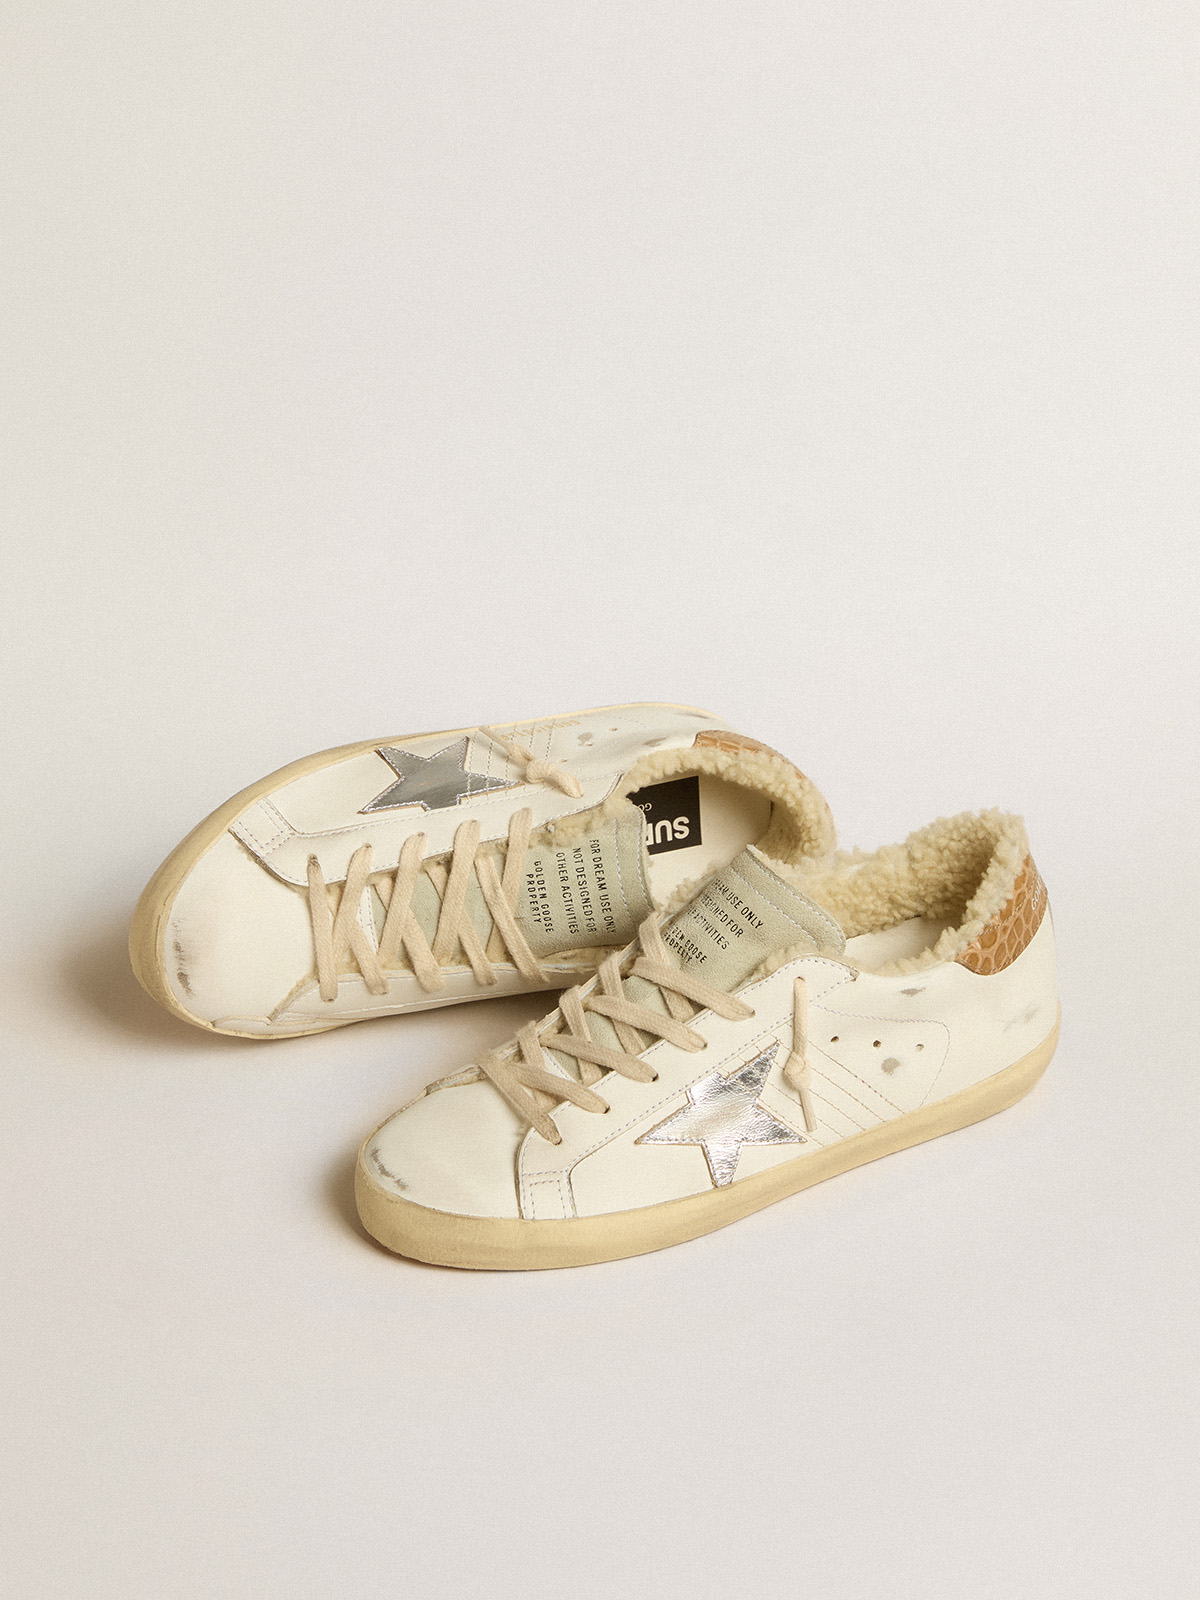 Super-Star with silver leather star and crocodile-print leather heel tab |  Golden Goose